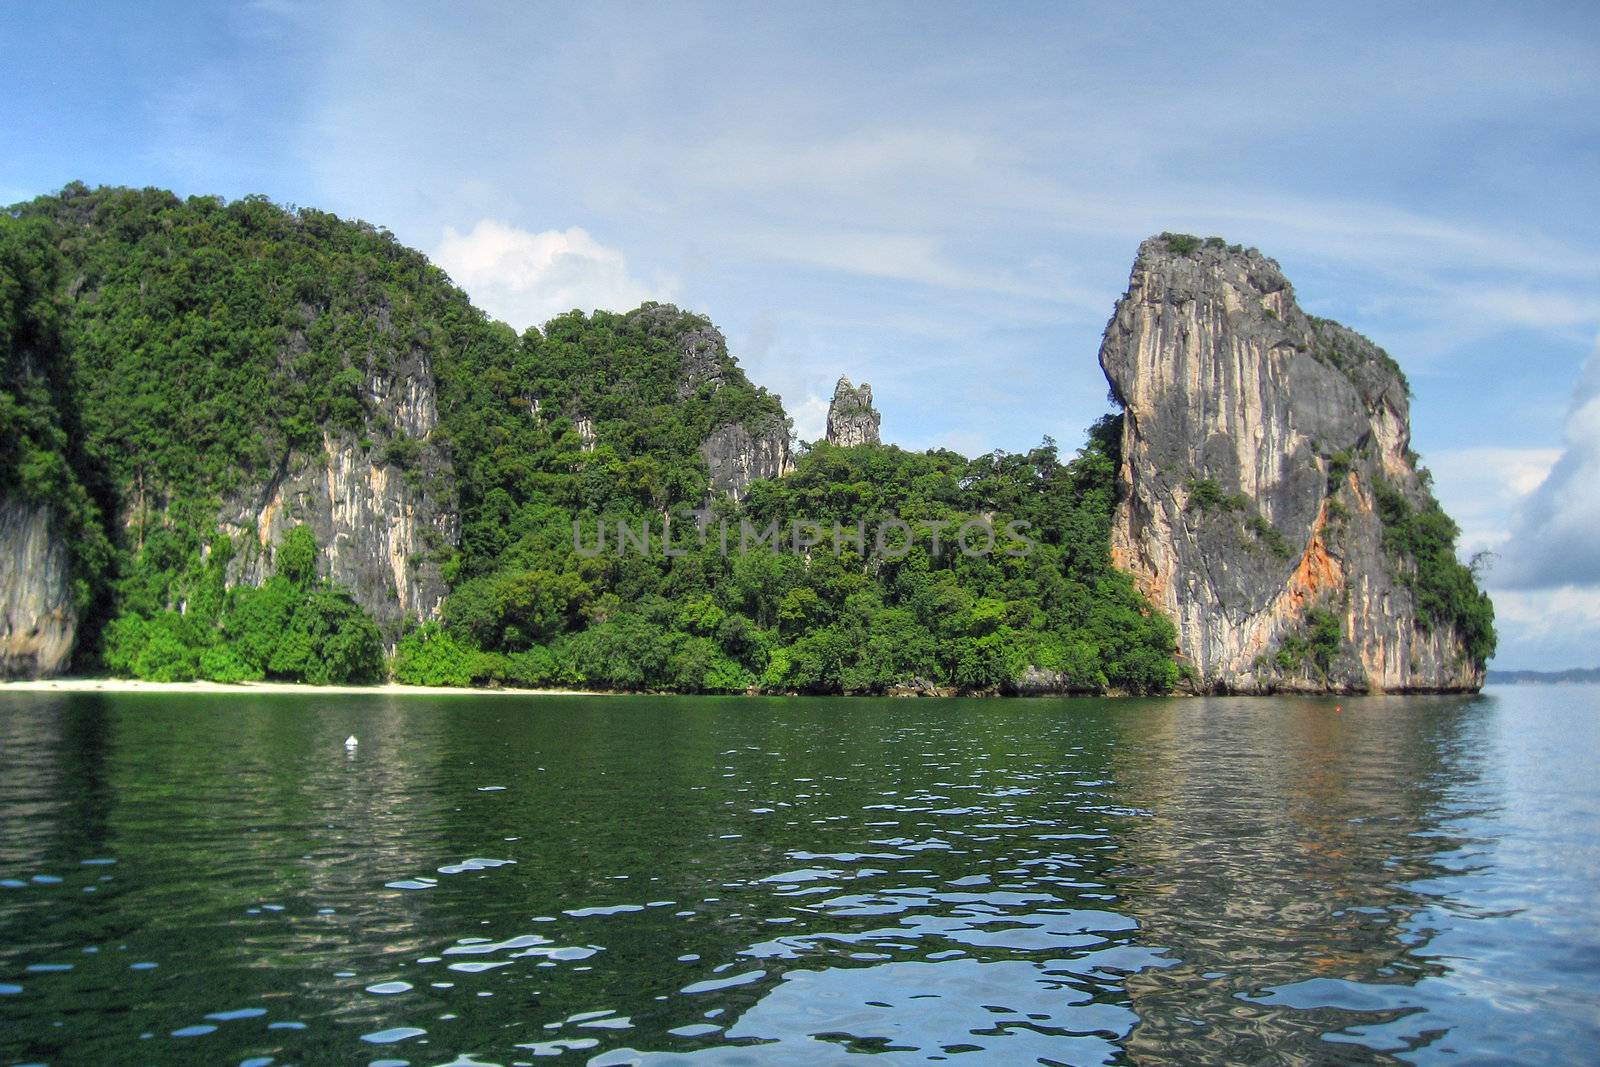 Detail of a Thailand Island with water and vegetation